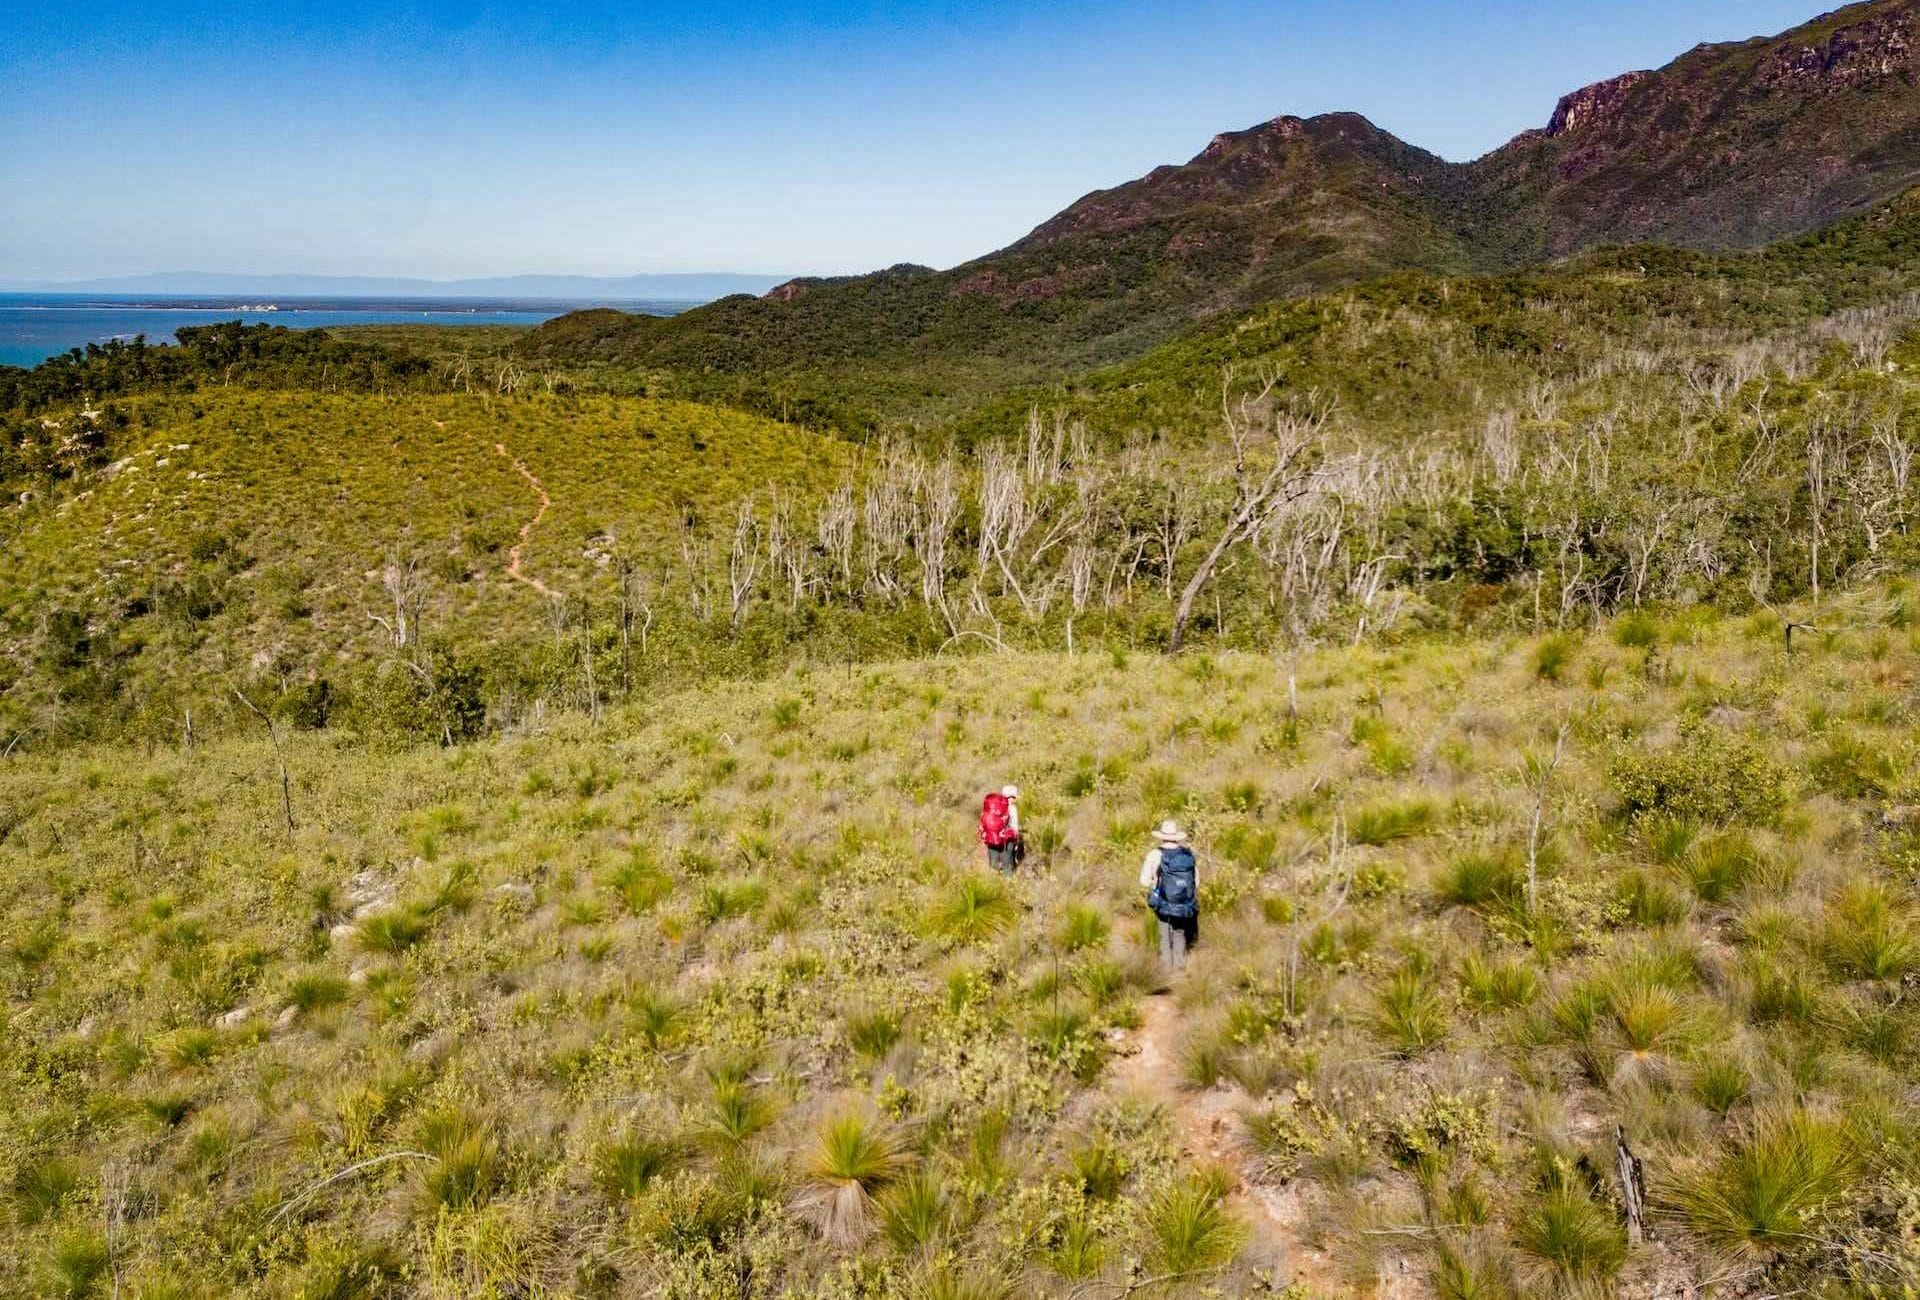 The Thorsborne Trails Offers 4 Days of Tropical Island Trekking, Andrew Boyle, Hinchinbrook Island, hike, trail, people, drone shot, mountain